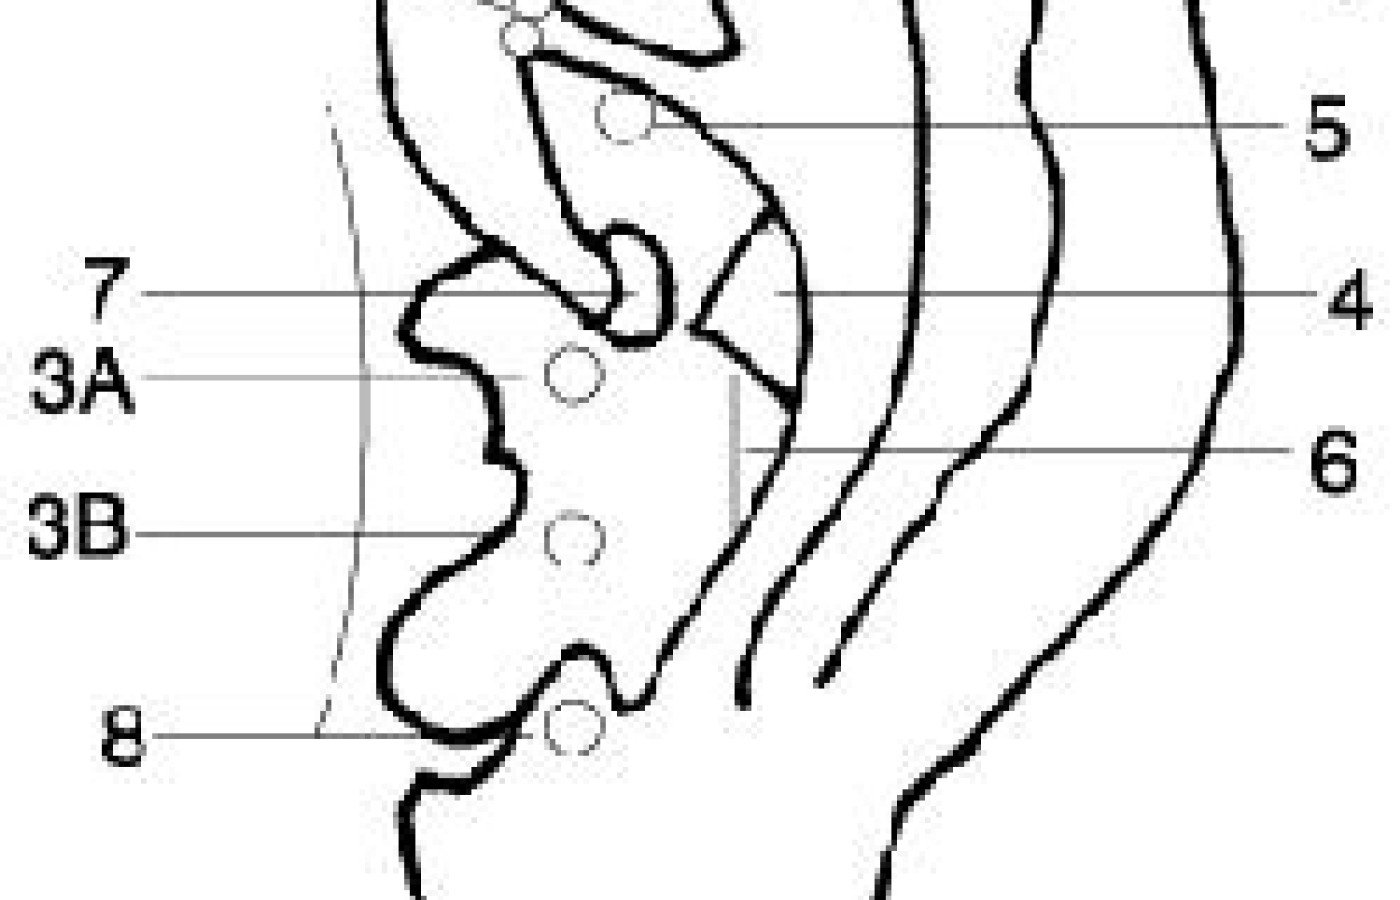 Illustration of an ear with locations of auricular points.